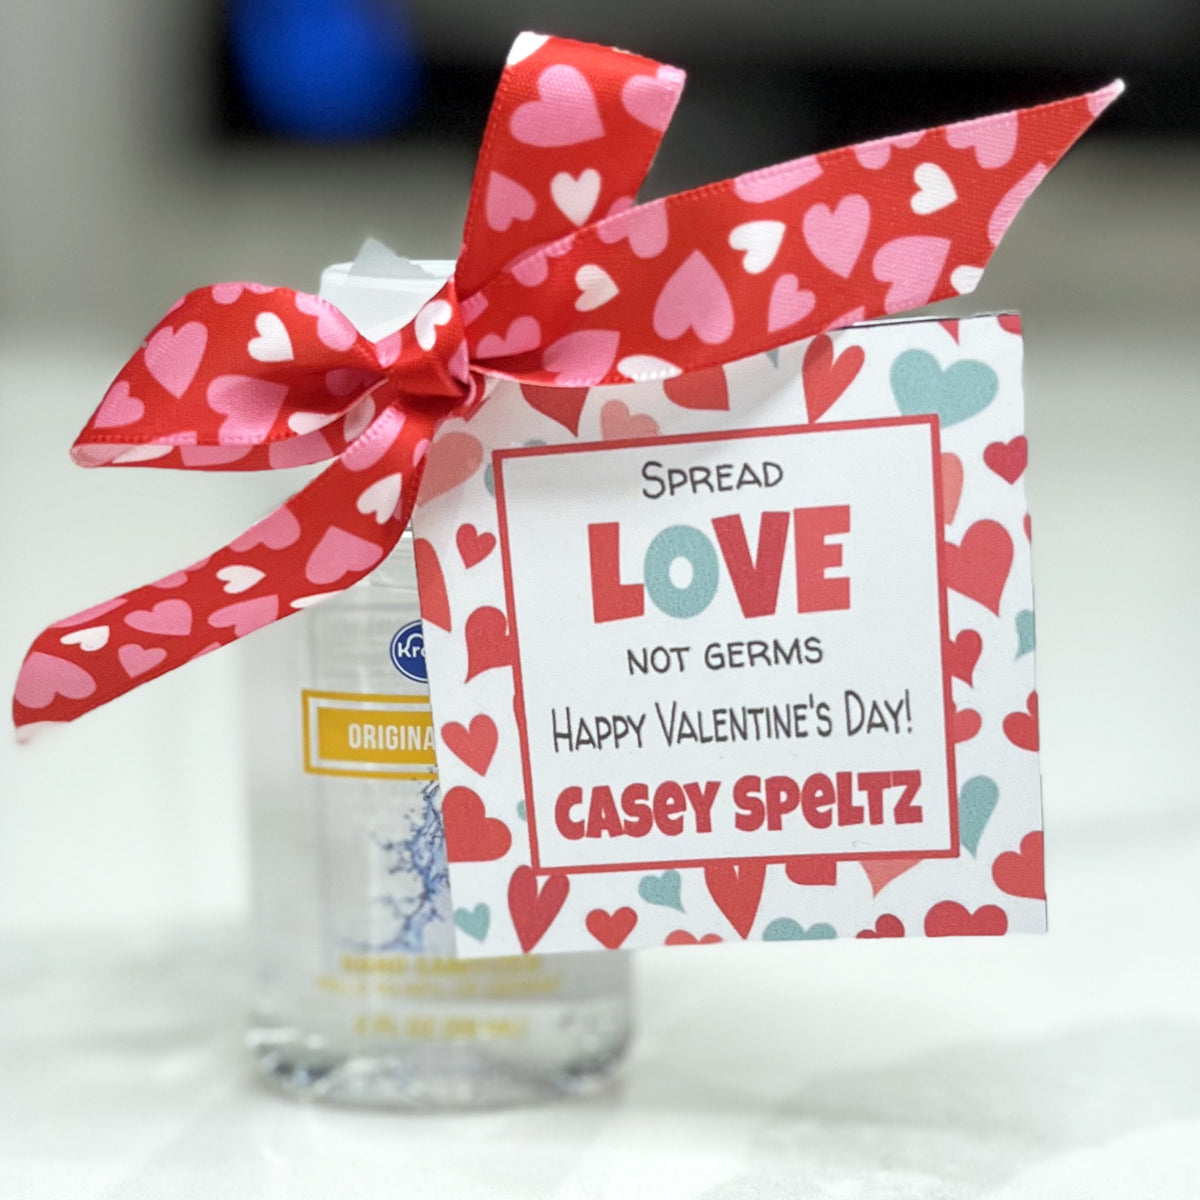 Spread Love not Germs Valentine Tag